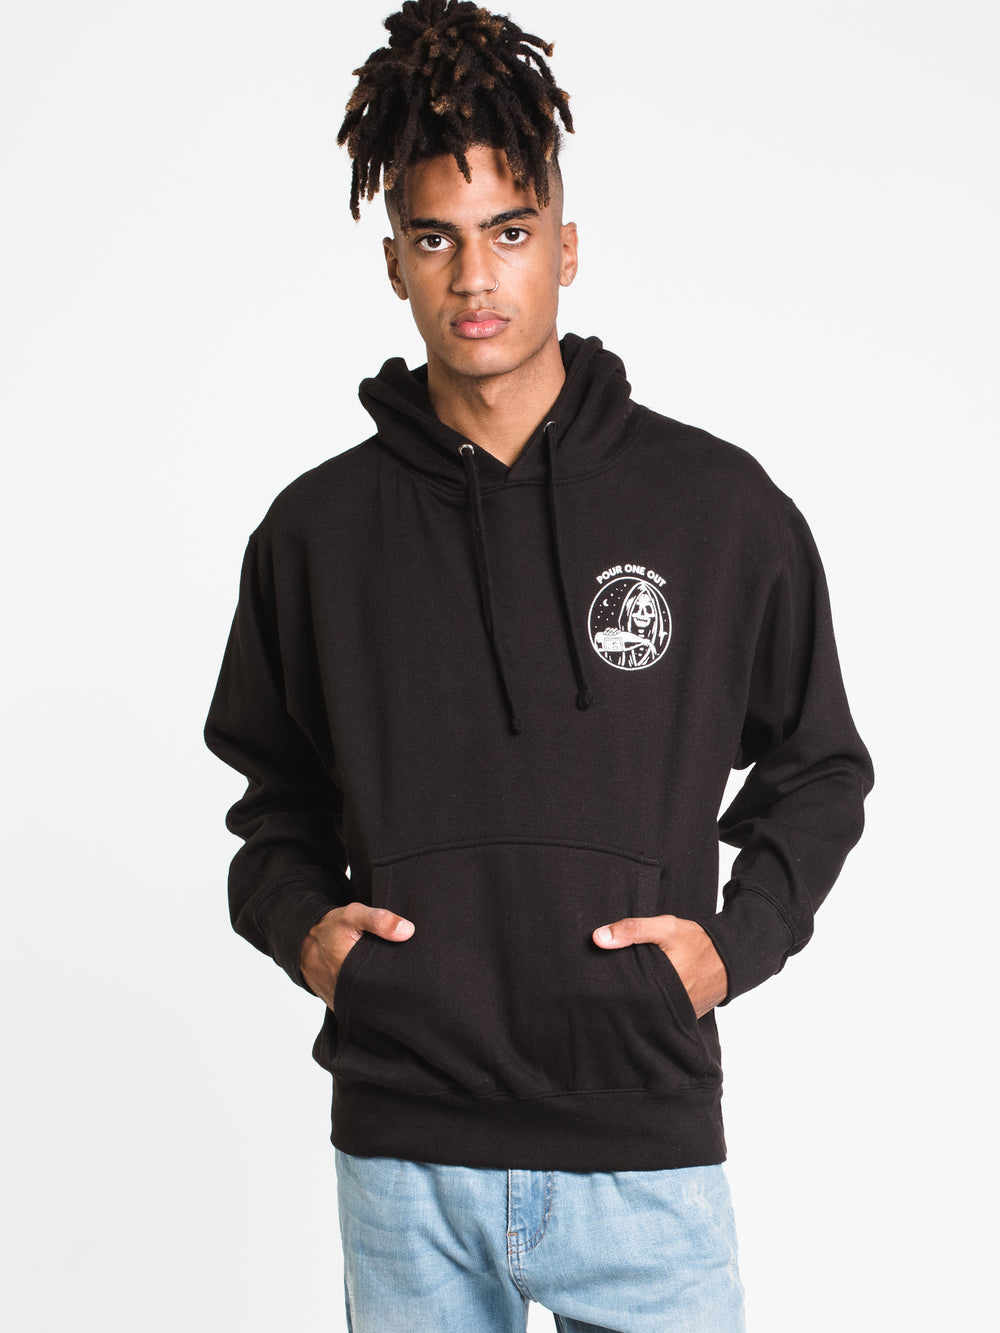 LAST CALL POUR PULLOVER HOODIE - BLACK - CLEARANCE